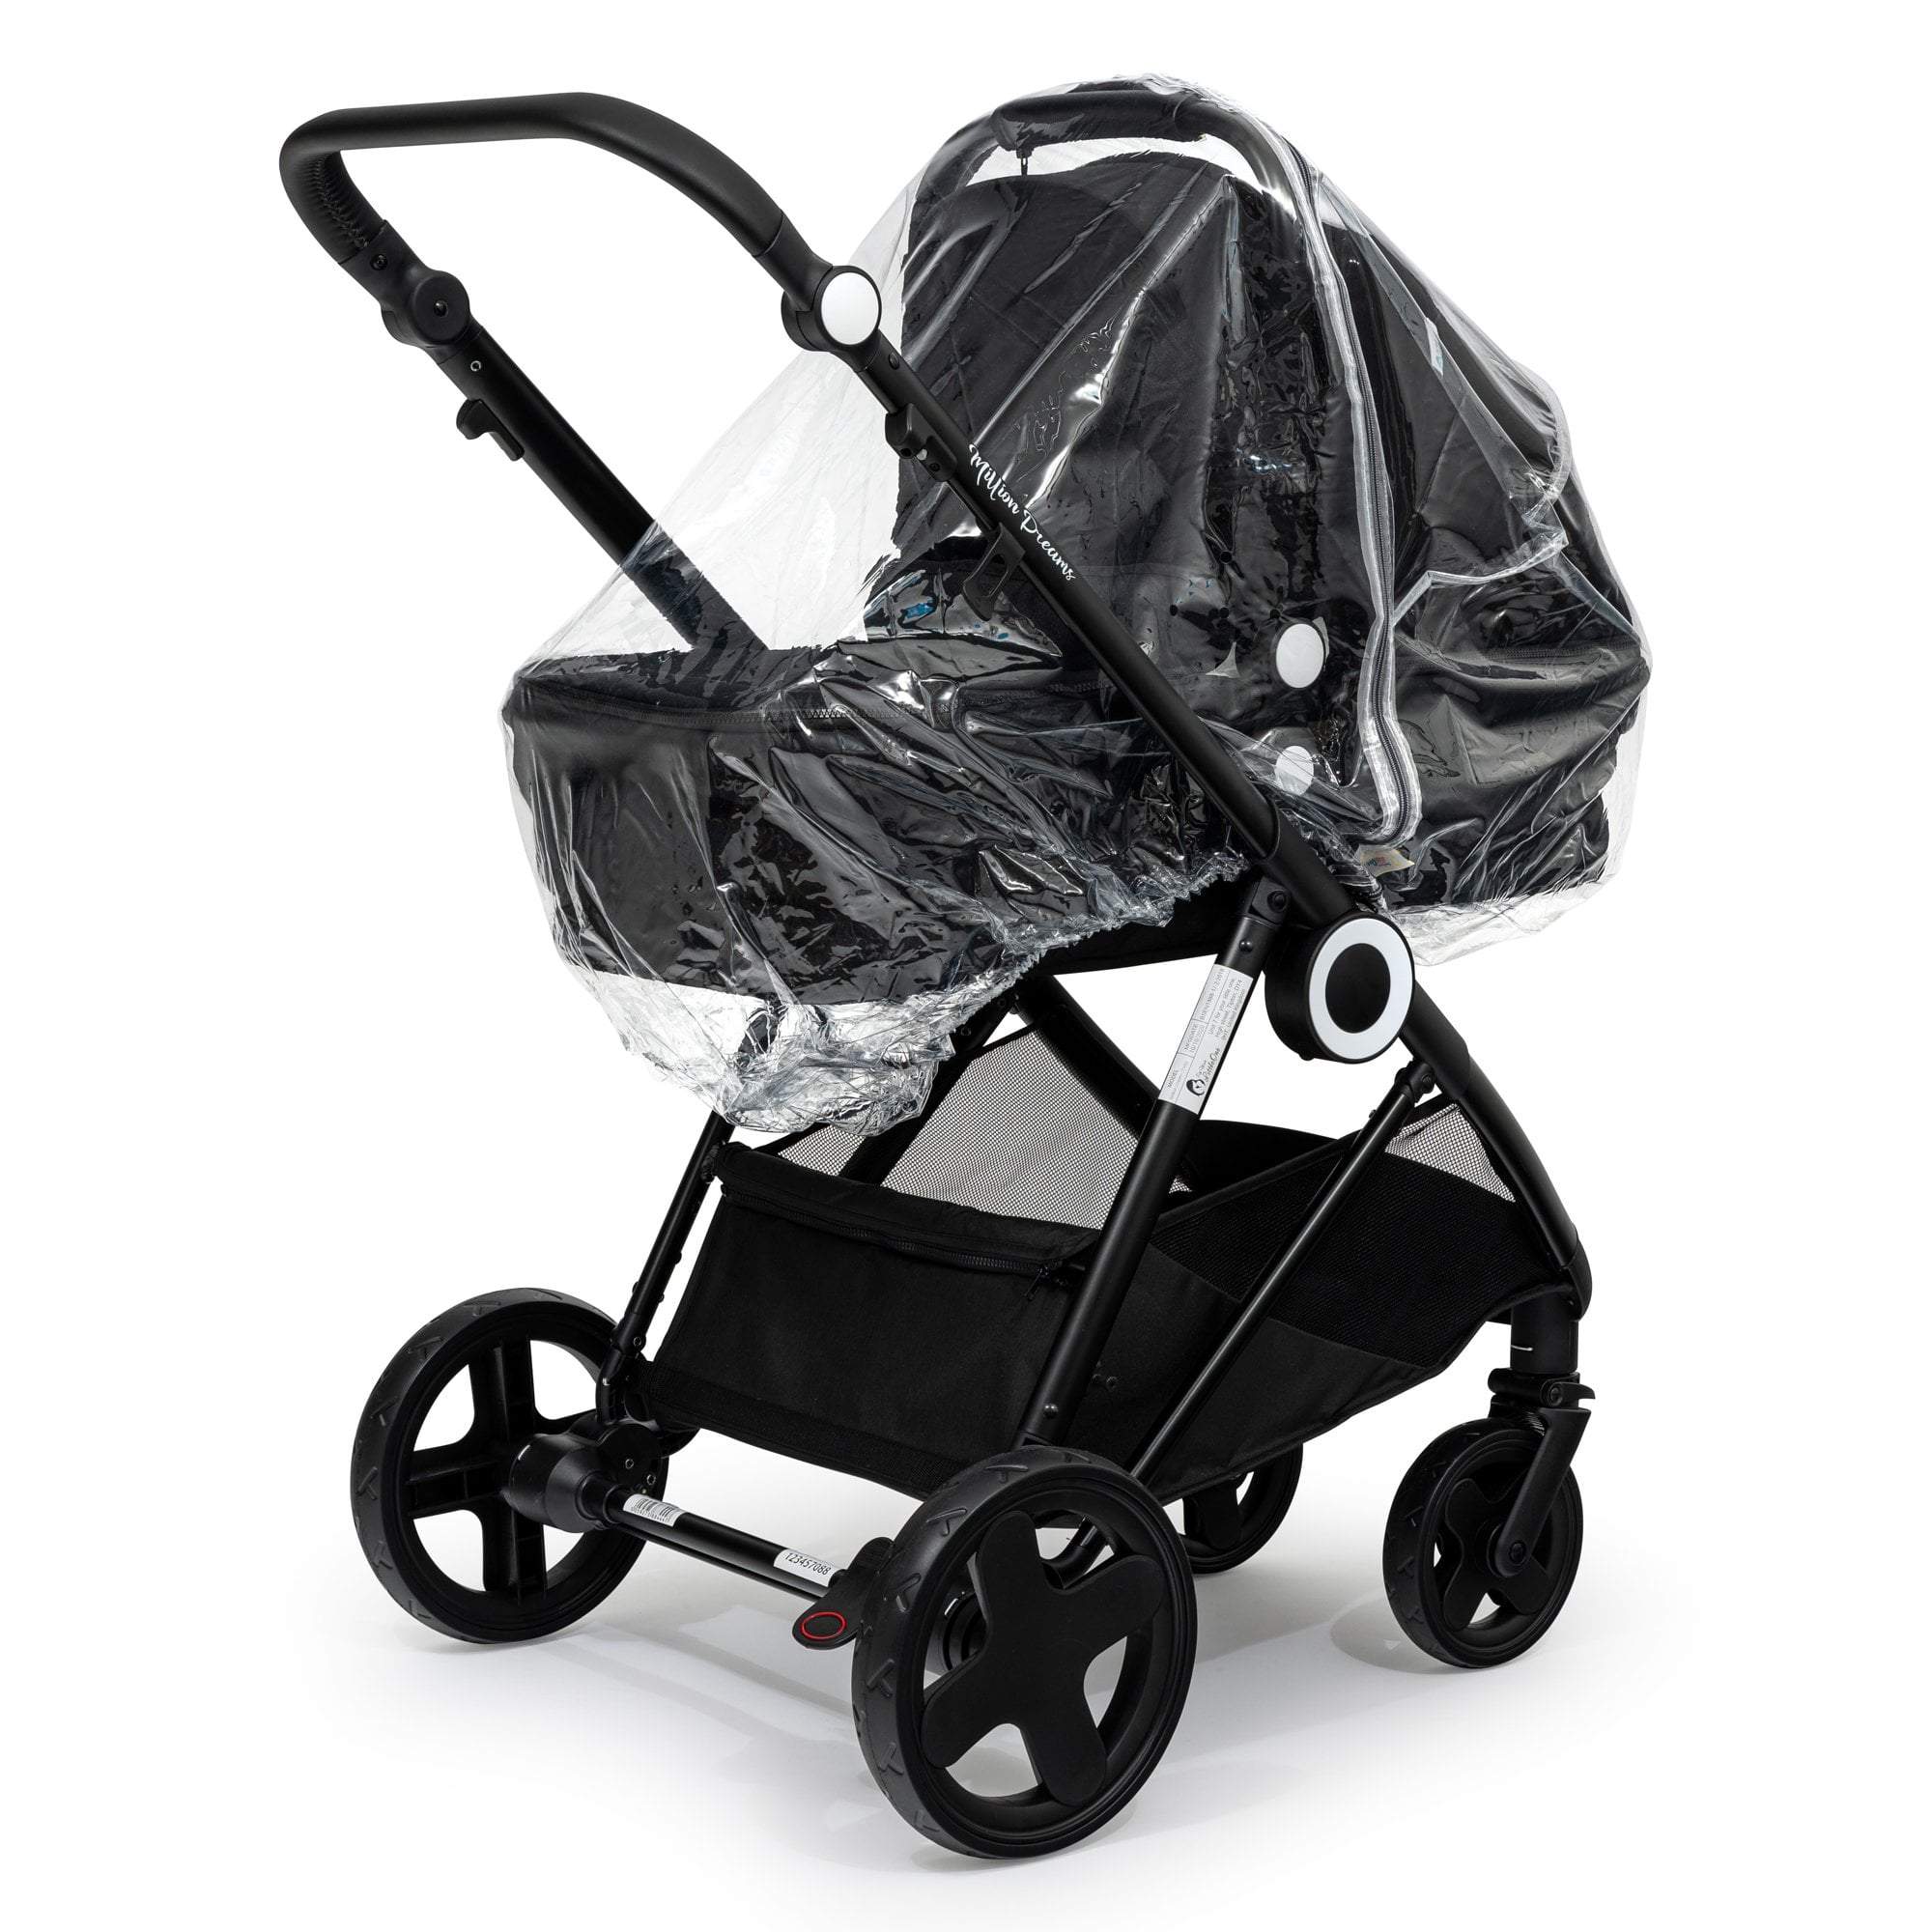 Carrycot Raincover Compatible With Hartan - Fits All Models - For Your Little One